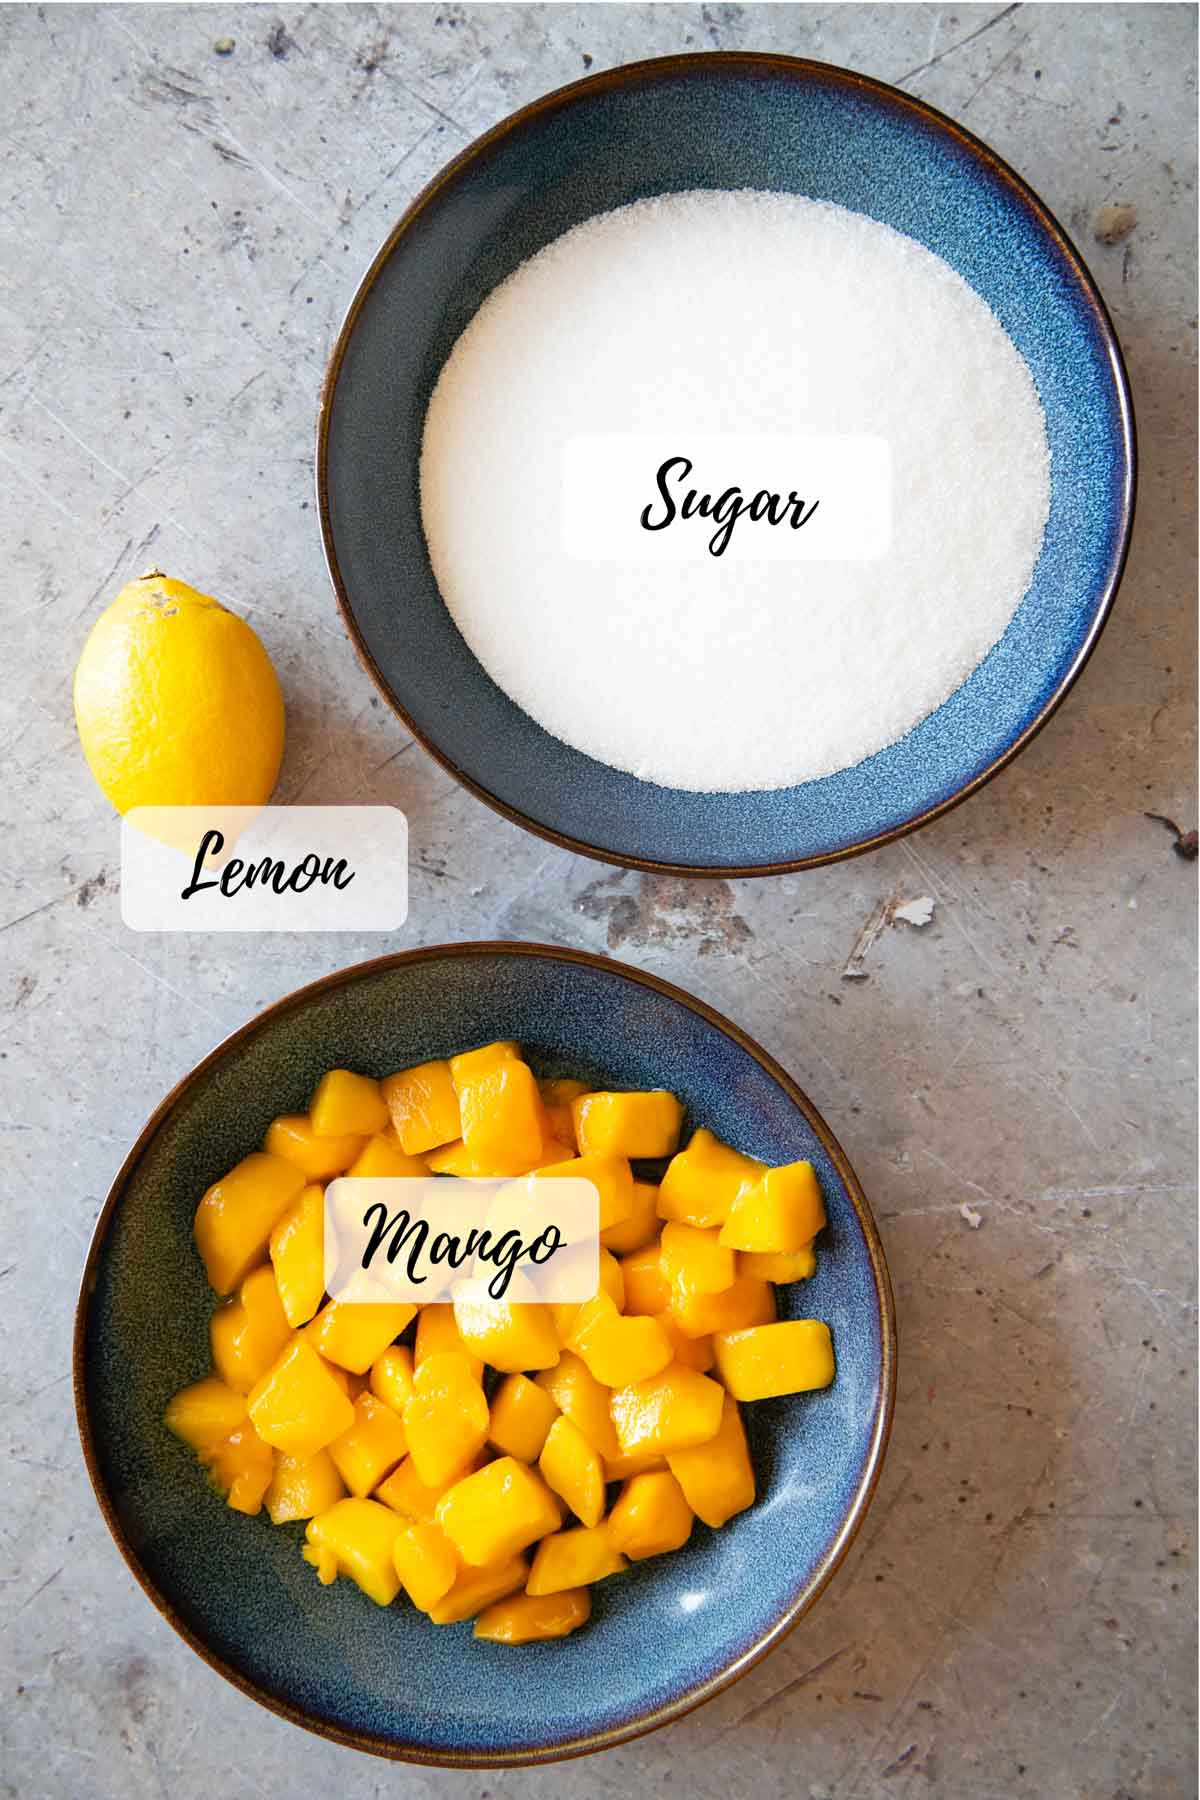 The ingredients: granulated white sugar, chopped frozen mango, and a lemon.